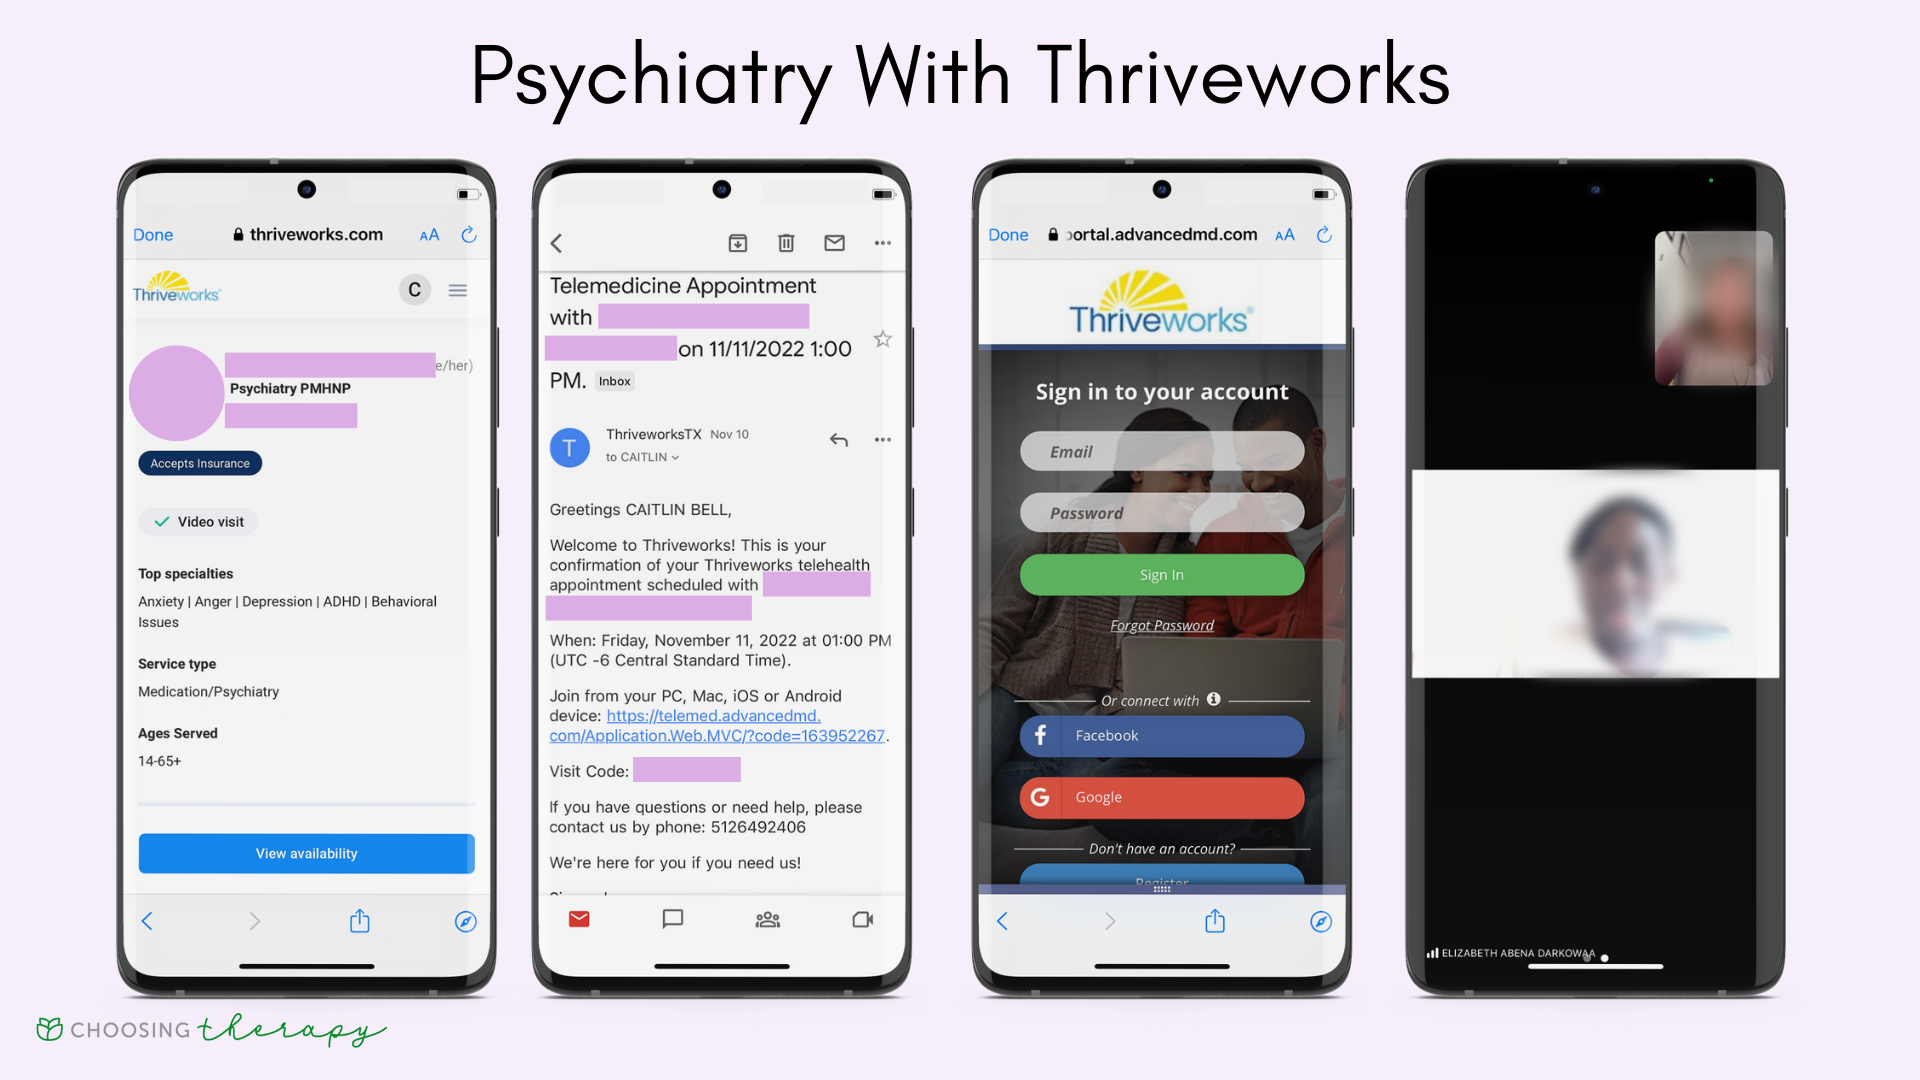 Thriveworks Review 2022 - Image of how to attend a psychiatry appointment with Thriveworks